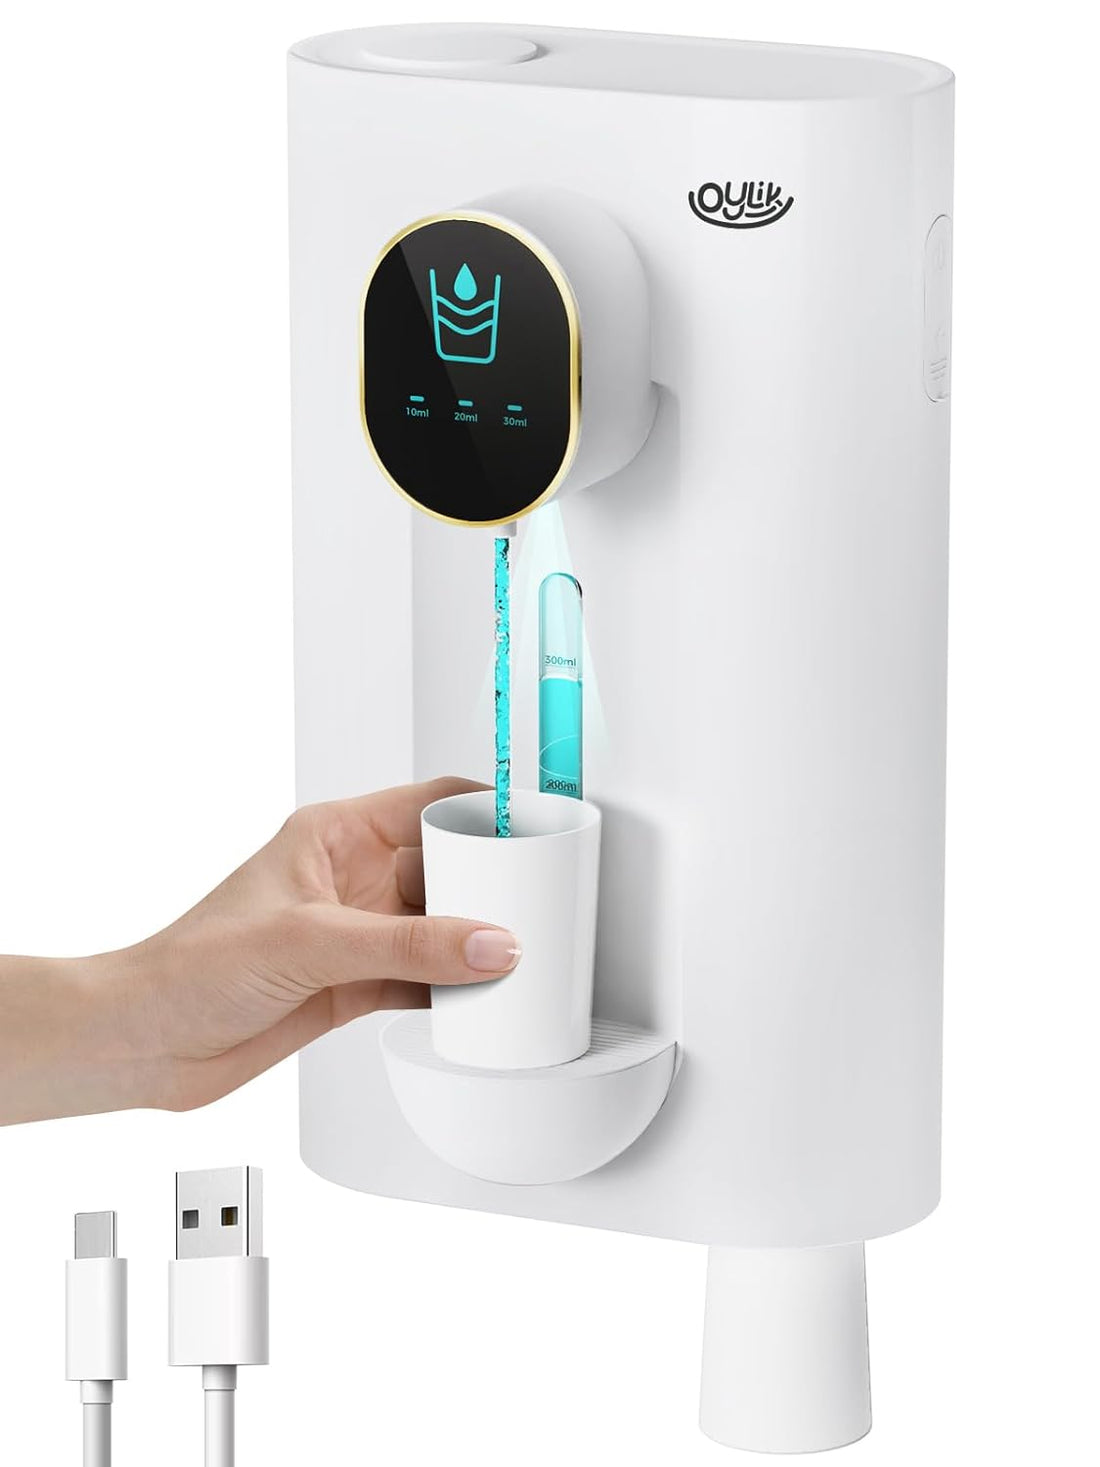 Oylik Automatic Mouthwash Dispenser 18.26 oz,Touchless Wall Mounted Mouth Wash Dispenser with USB Charging,2 Magnetic Cups,Led Screen,3 Mode Liquid Volume Adjustable for Kids and Adults-White…